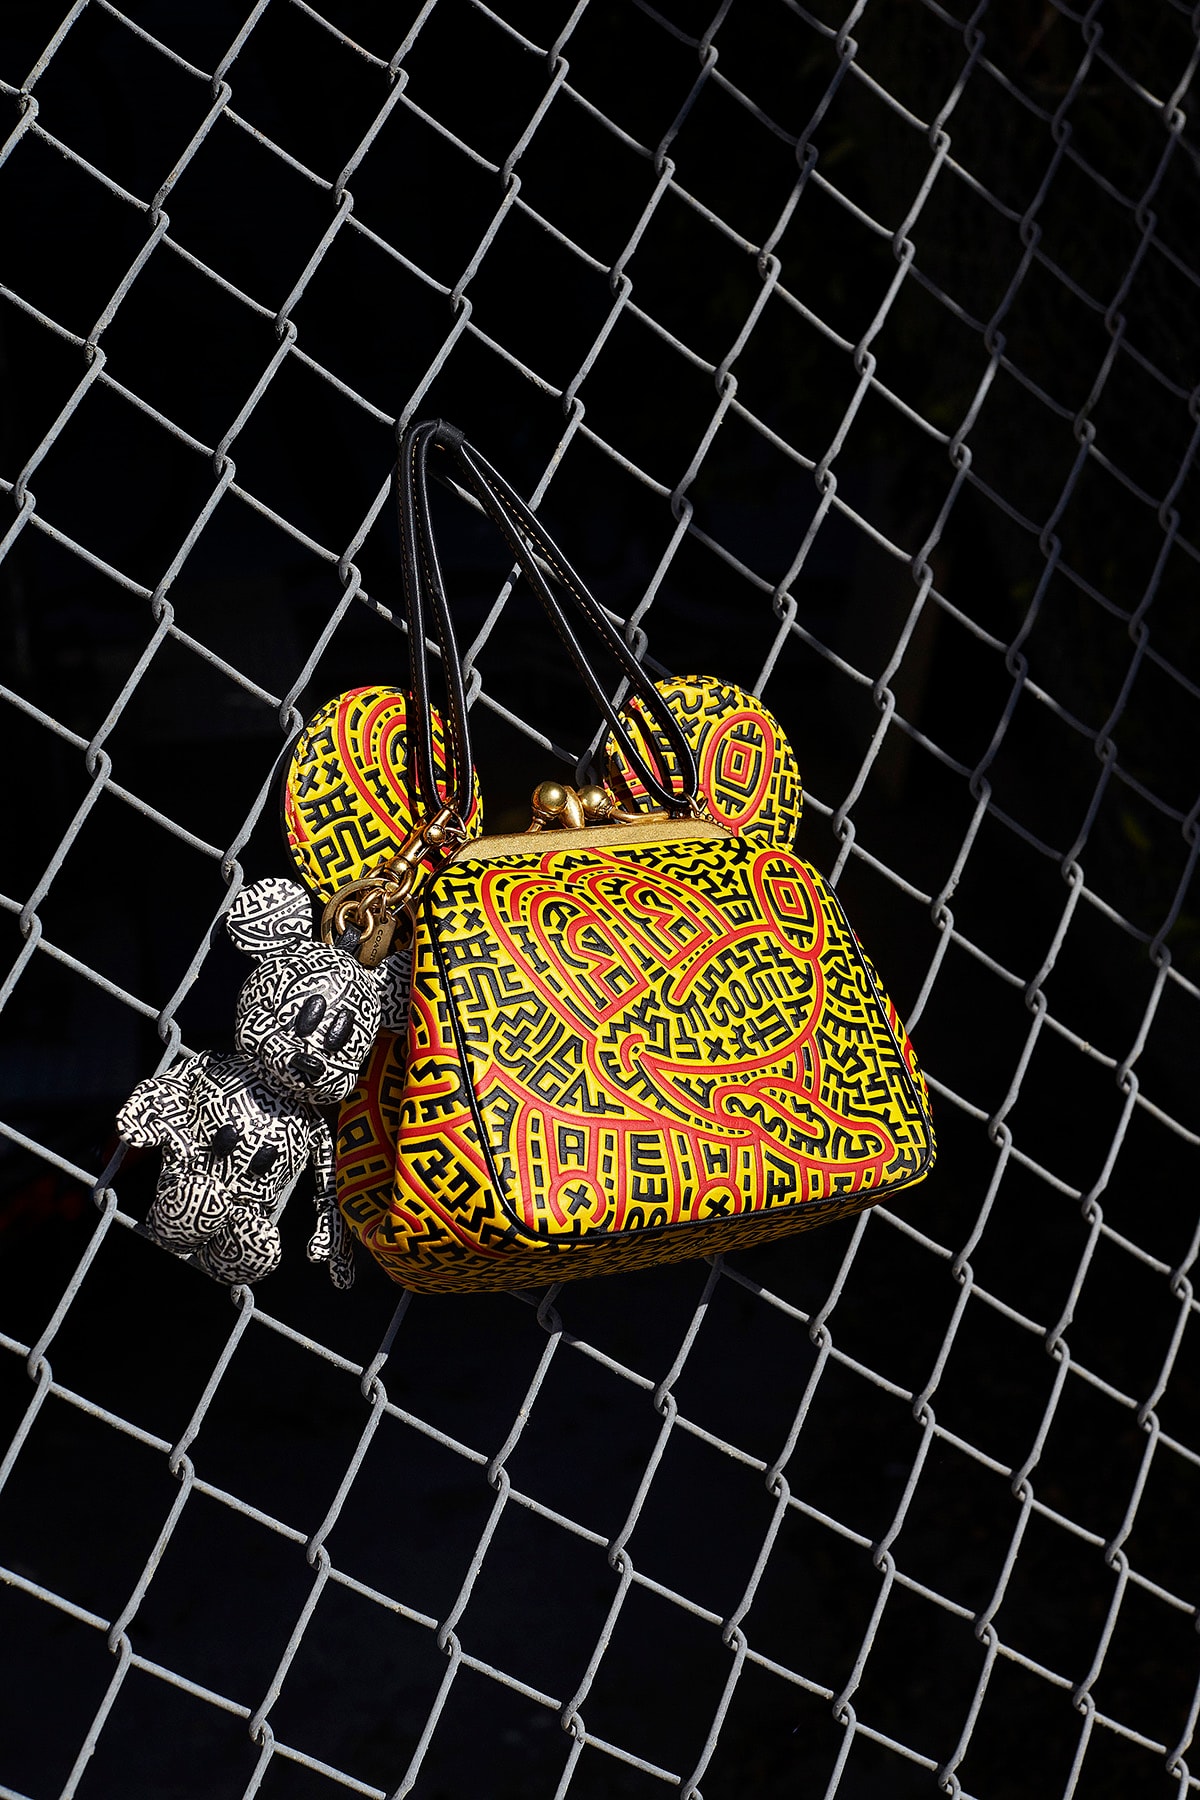 Mickey Mouse x Keith Haring x Coach Bag Collaboration Collection